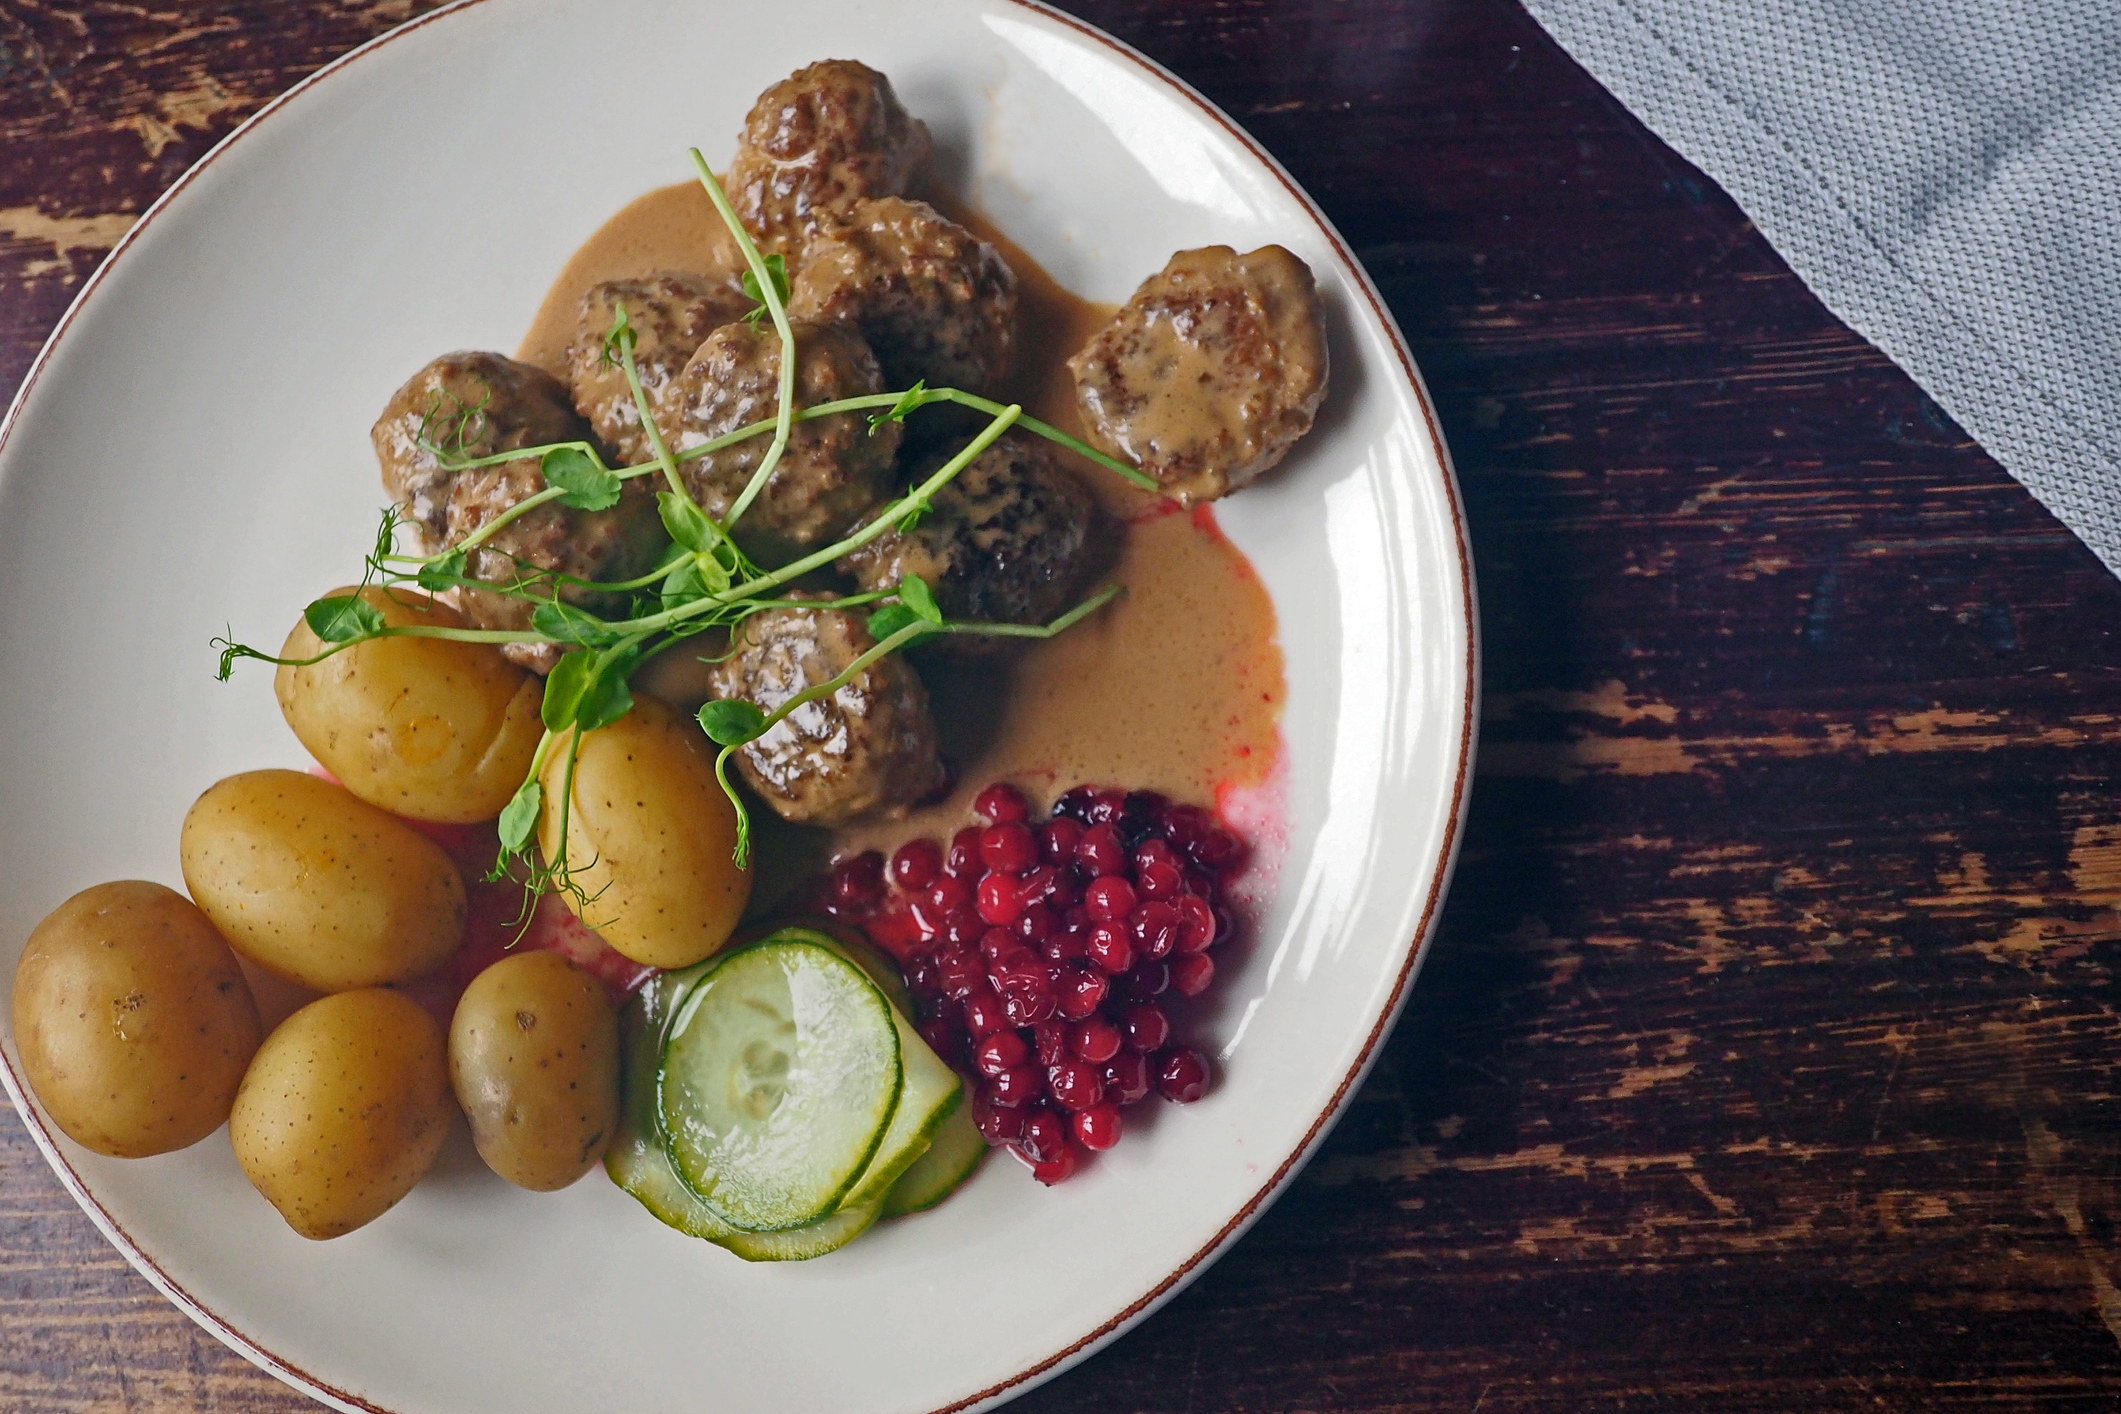 A plate of Swedish meatballs with potatoes and berry jam